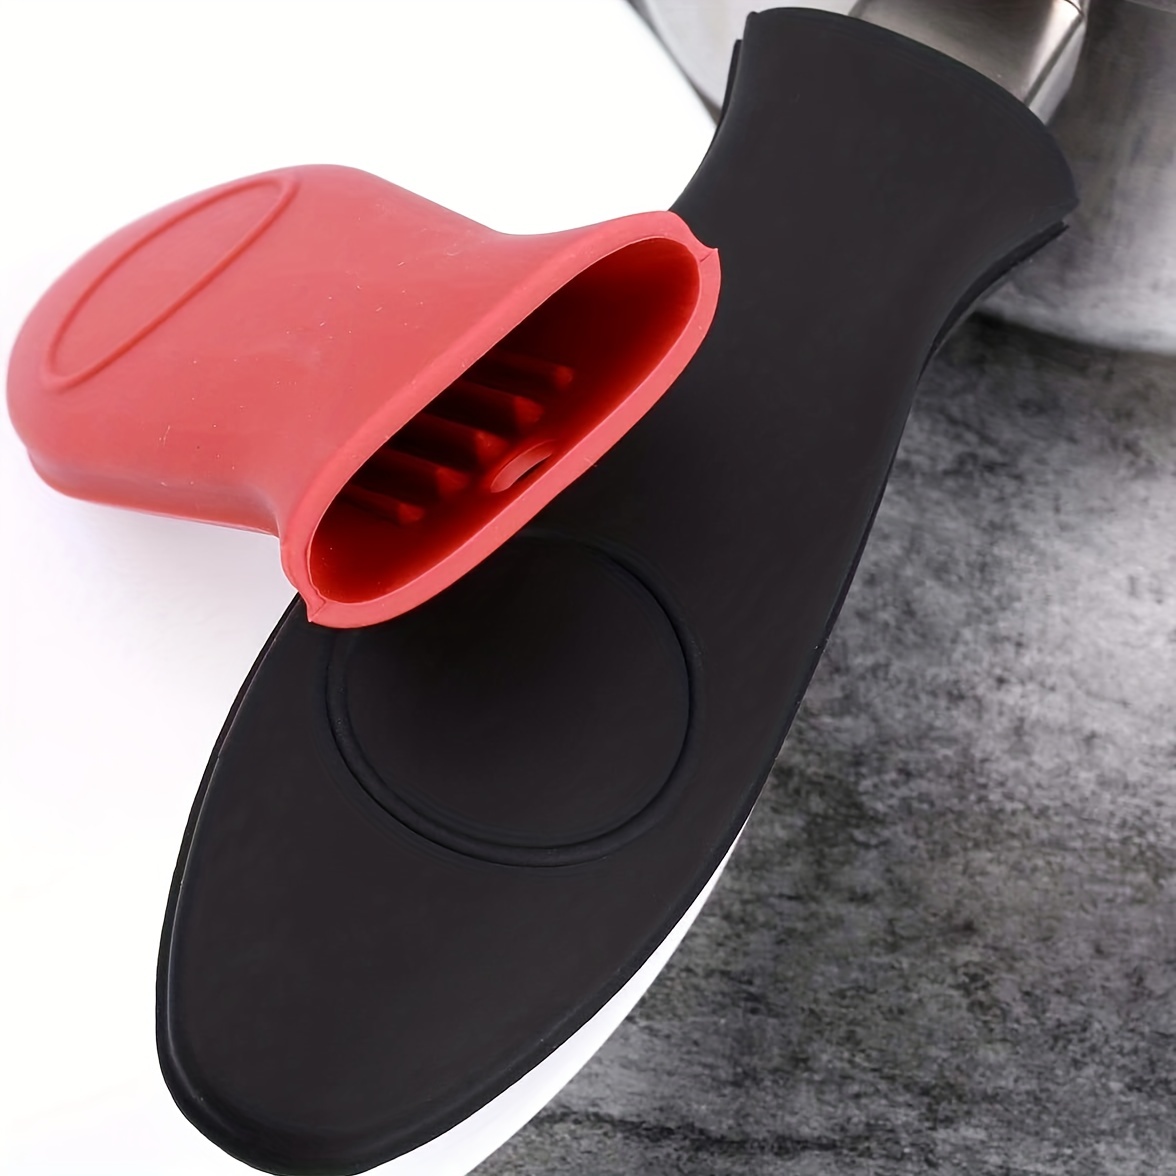 Cast Iron Handle Cover, Silicone Hot Handle Holder, Assist Handle